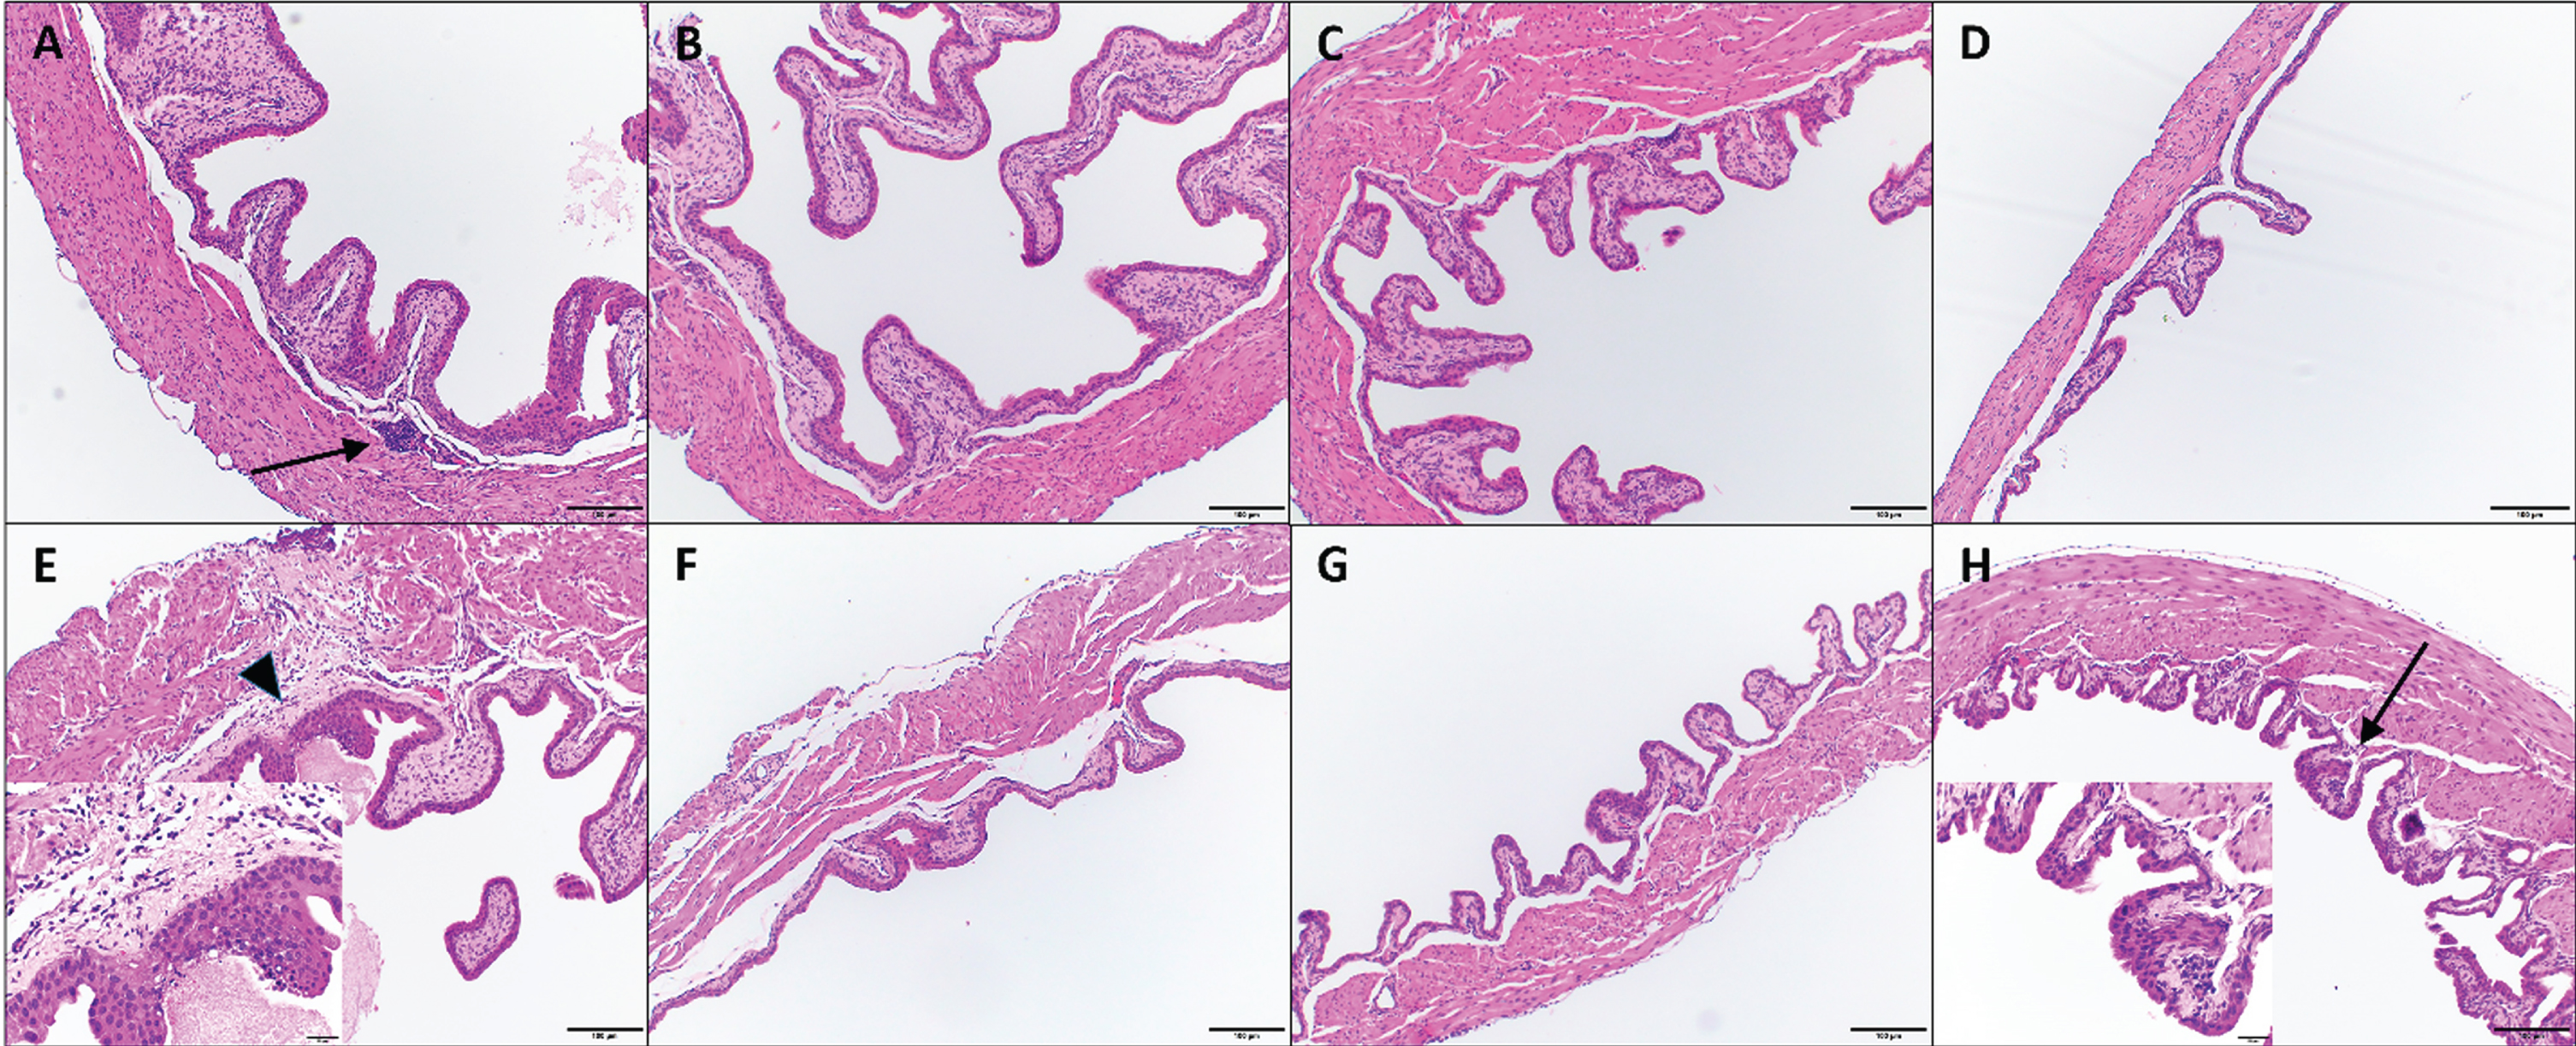 Histologic images of mouse urinary bladders at different time points. Images A-D. IL-12 alone treatment at 24h (A), 48 hours (B), 72 hours (C) and 96 hours (D). Images E-H. CS/IL-12 treatment at 24h (E), 48 hours (F), 72 hours (G) and 96 hours (H). Arrows indicate minimal lymphoplasmacytic perivascular infiltrates that constituted a grade 1 response; insert for image (H) shows inflammation at higher magnification. Arrowhead indicates rare, minimal neutrophilic inflammation and fibrin exudation (also grade 1); insert for image (E) shows inflammation at higher magnification. All images using 10x objective. Inserts for (E) and (H) are using 40x objective.